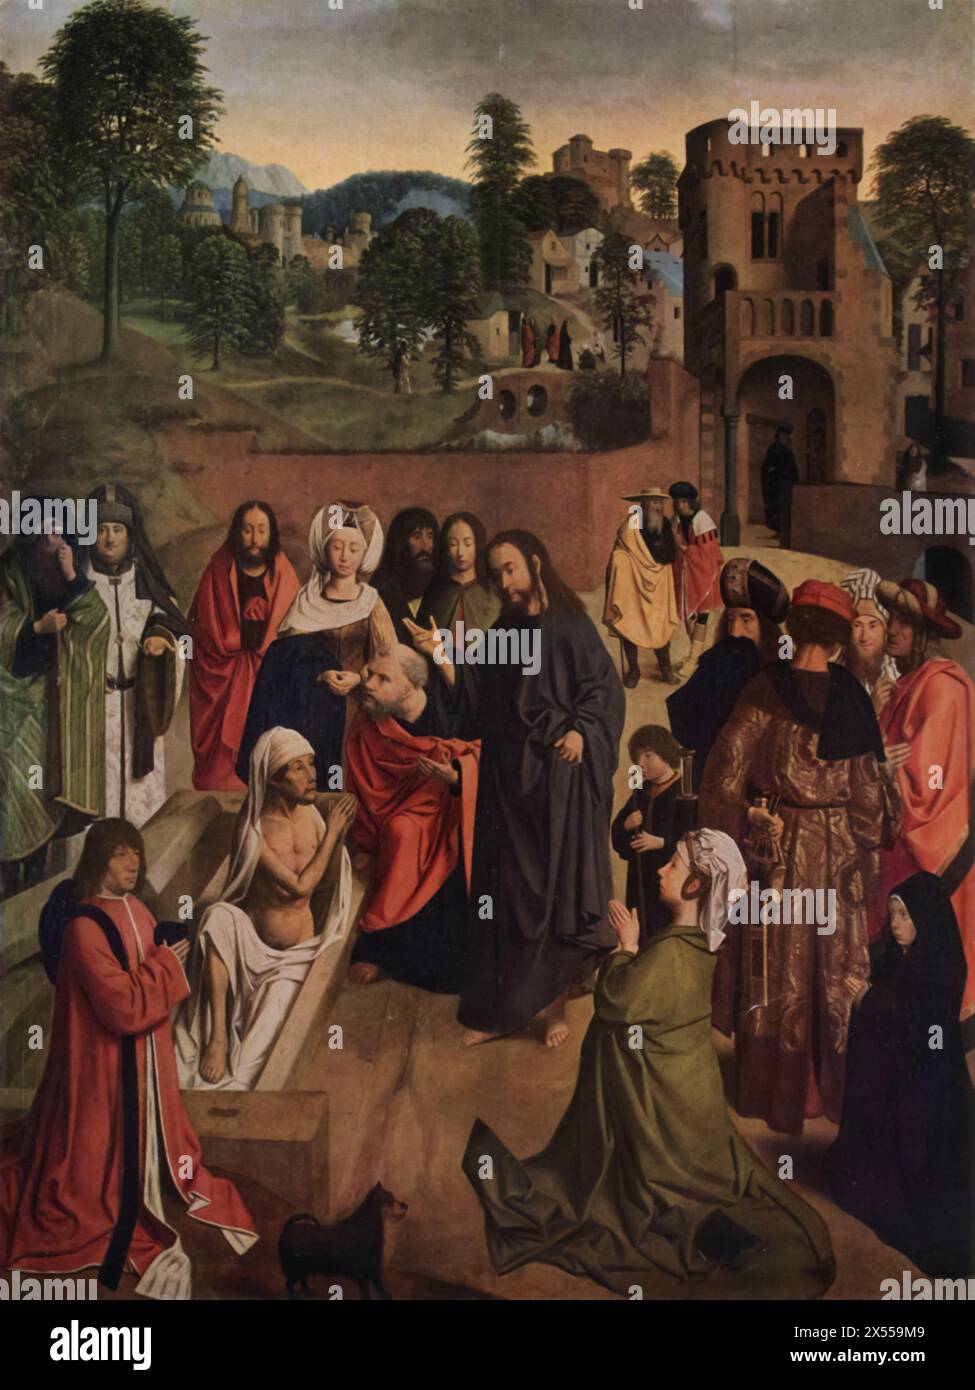 The Resurrection of Lazarus' by Geertgen tot Sint Jans, dated 15th Century, housed at the Louvre Museum, Paris, France. This painting illustrates the biblical miracle where Jesus Christ raises Lazarus from the dead, showcasing Geertgen’s ability to capture profound religious moments with emotional depth and spiritual intensity. Stock Photo